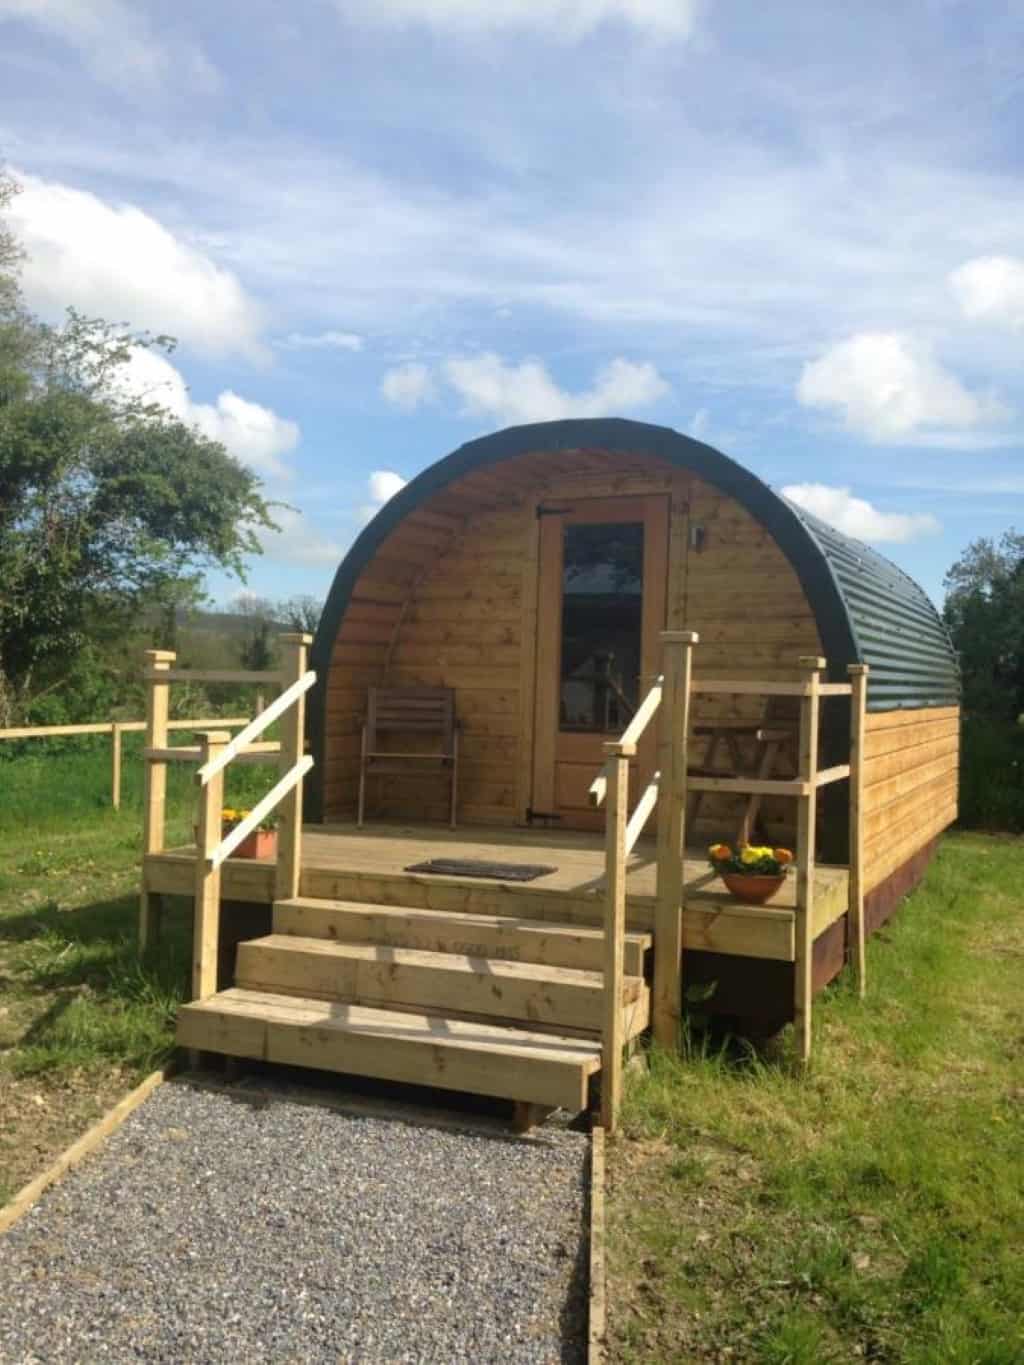 Carrigeen Glamping - an idyllic, cozy and tranquil accommodation providing guests with picturesque Instagrammable surroundings